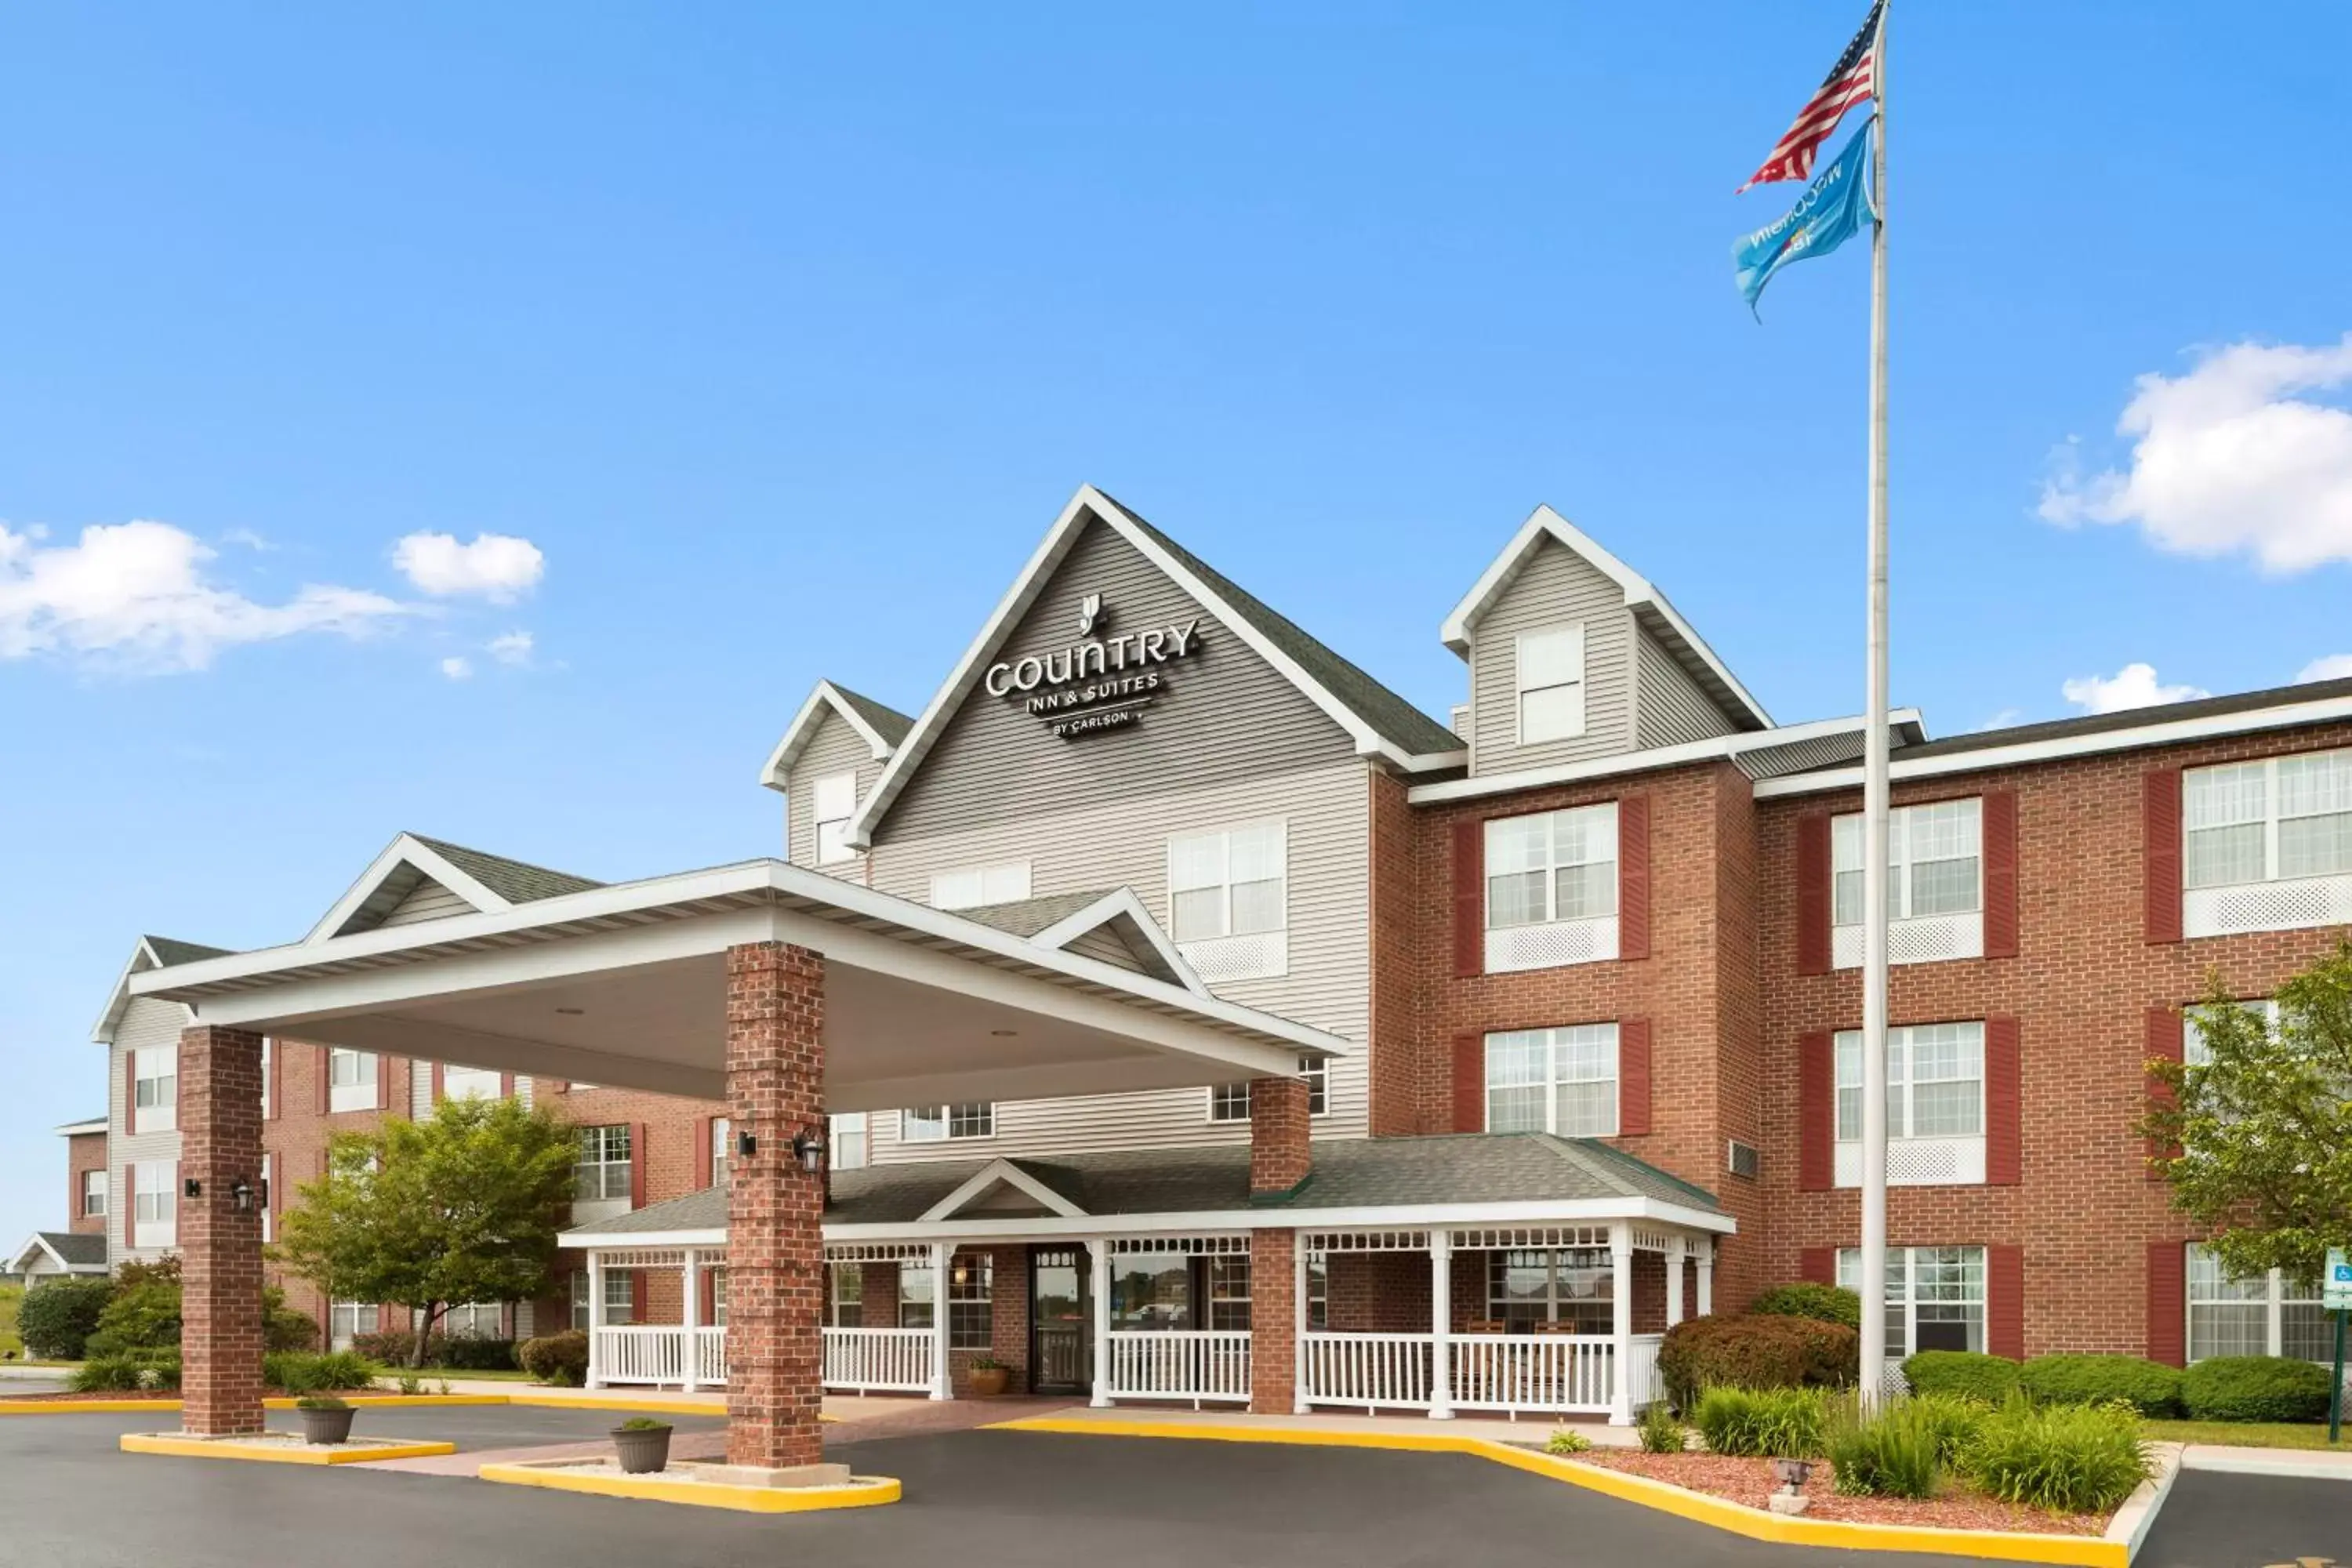 Facade/entrance, Property Building in Country Inn & Suites by Radisson, Kenosha, WI